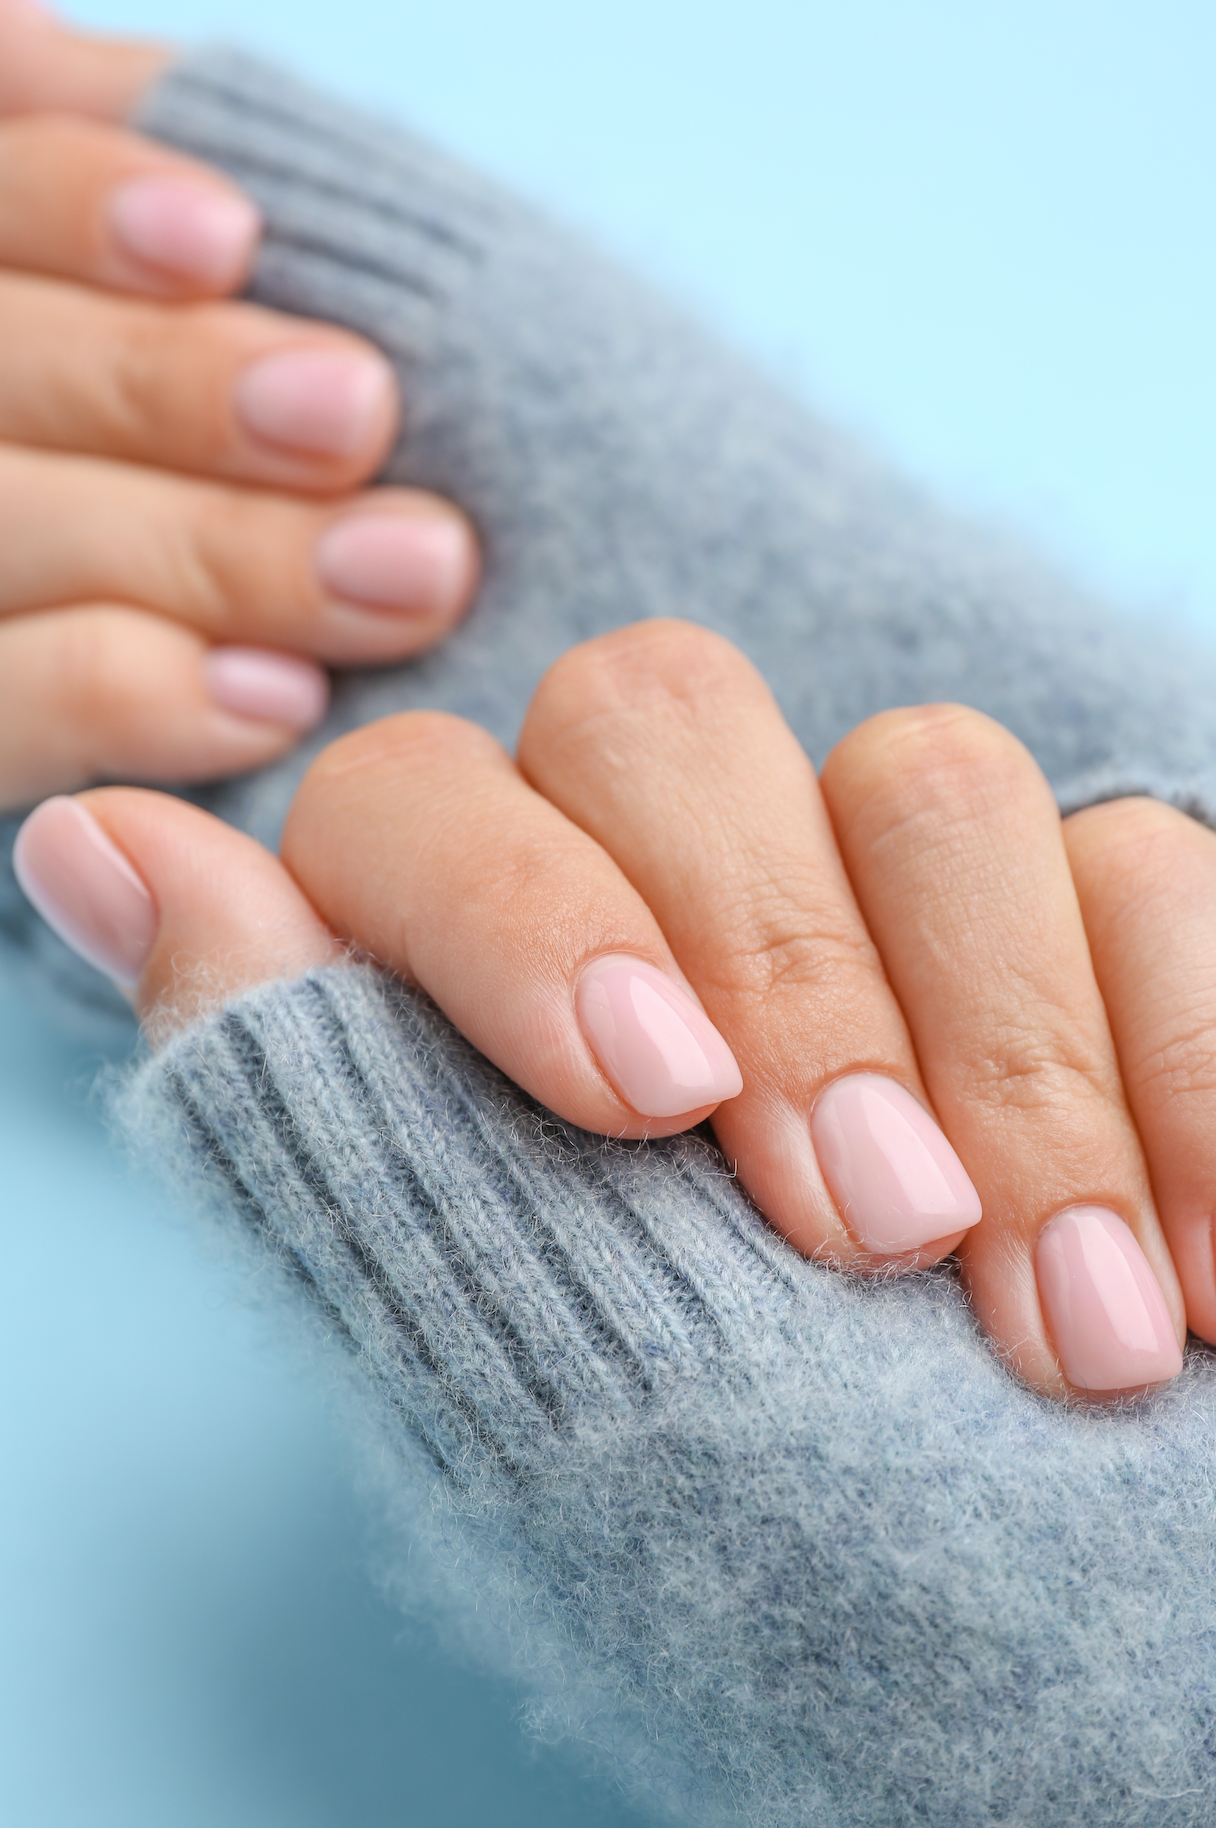 6 Things Your Nails Say About Your Health